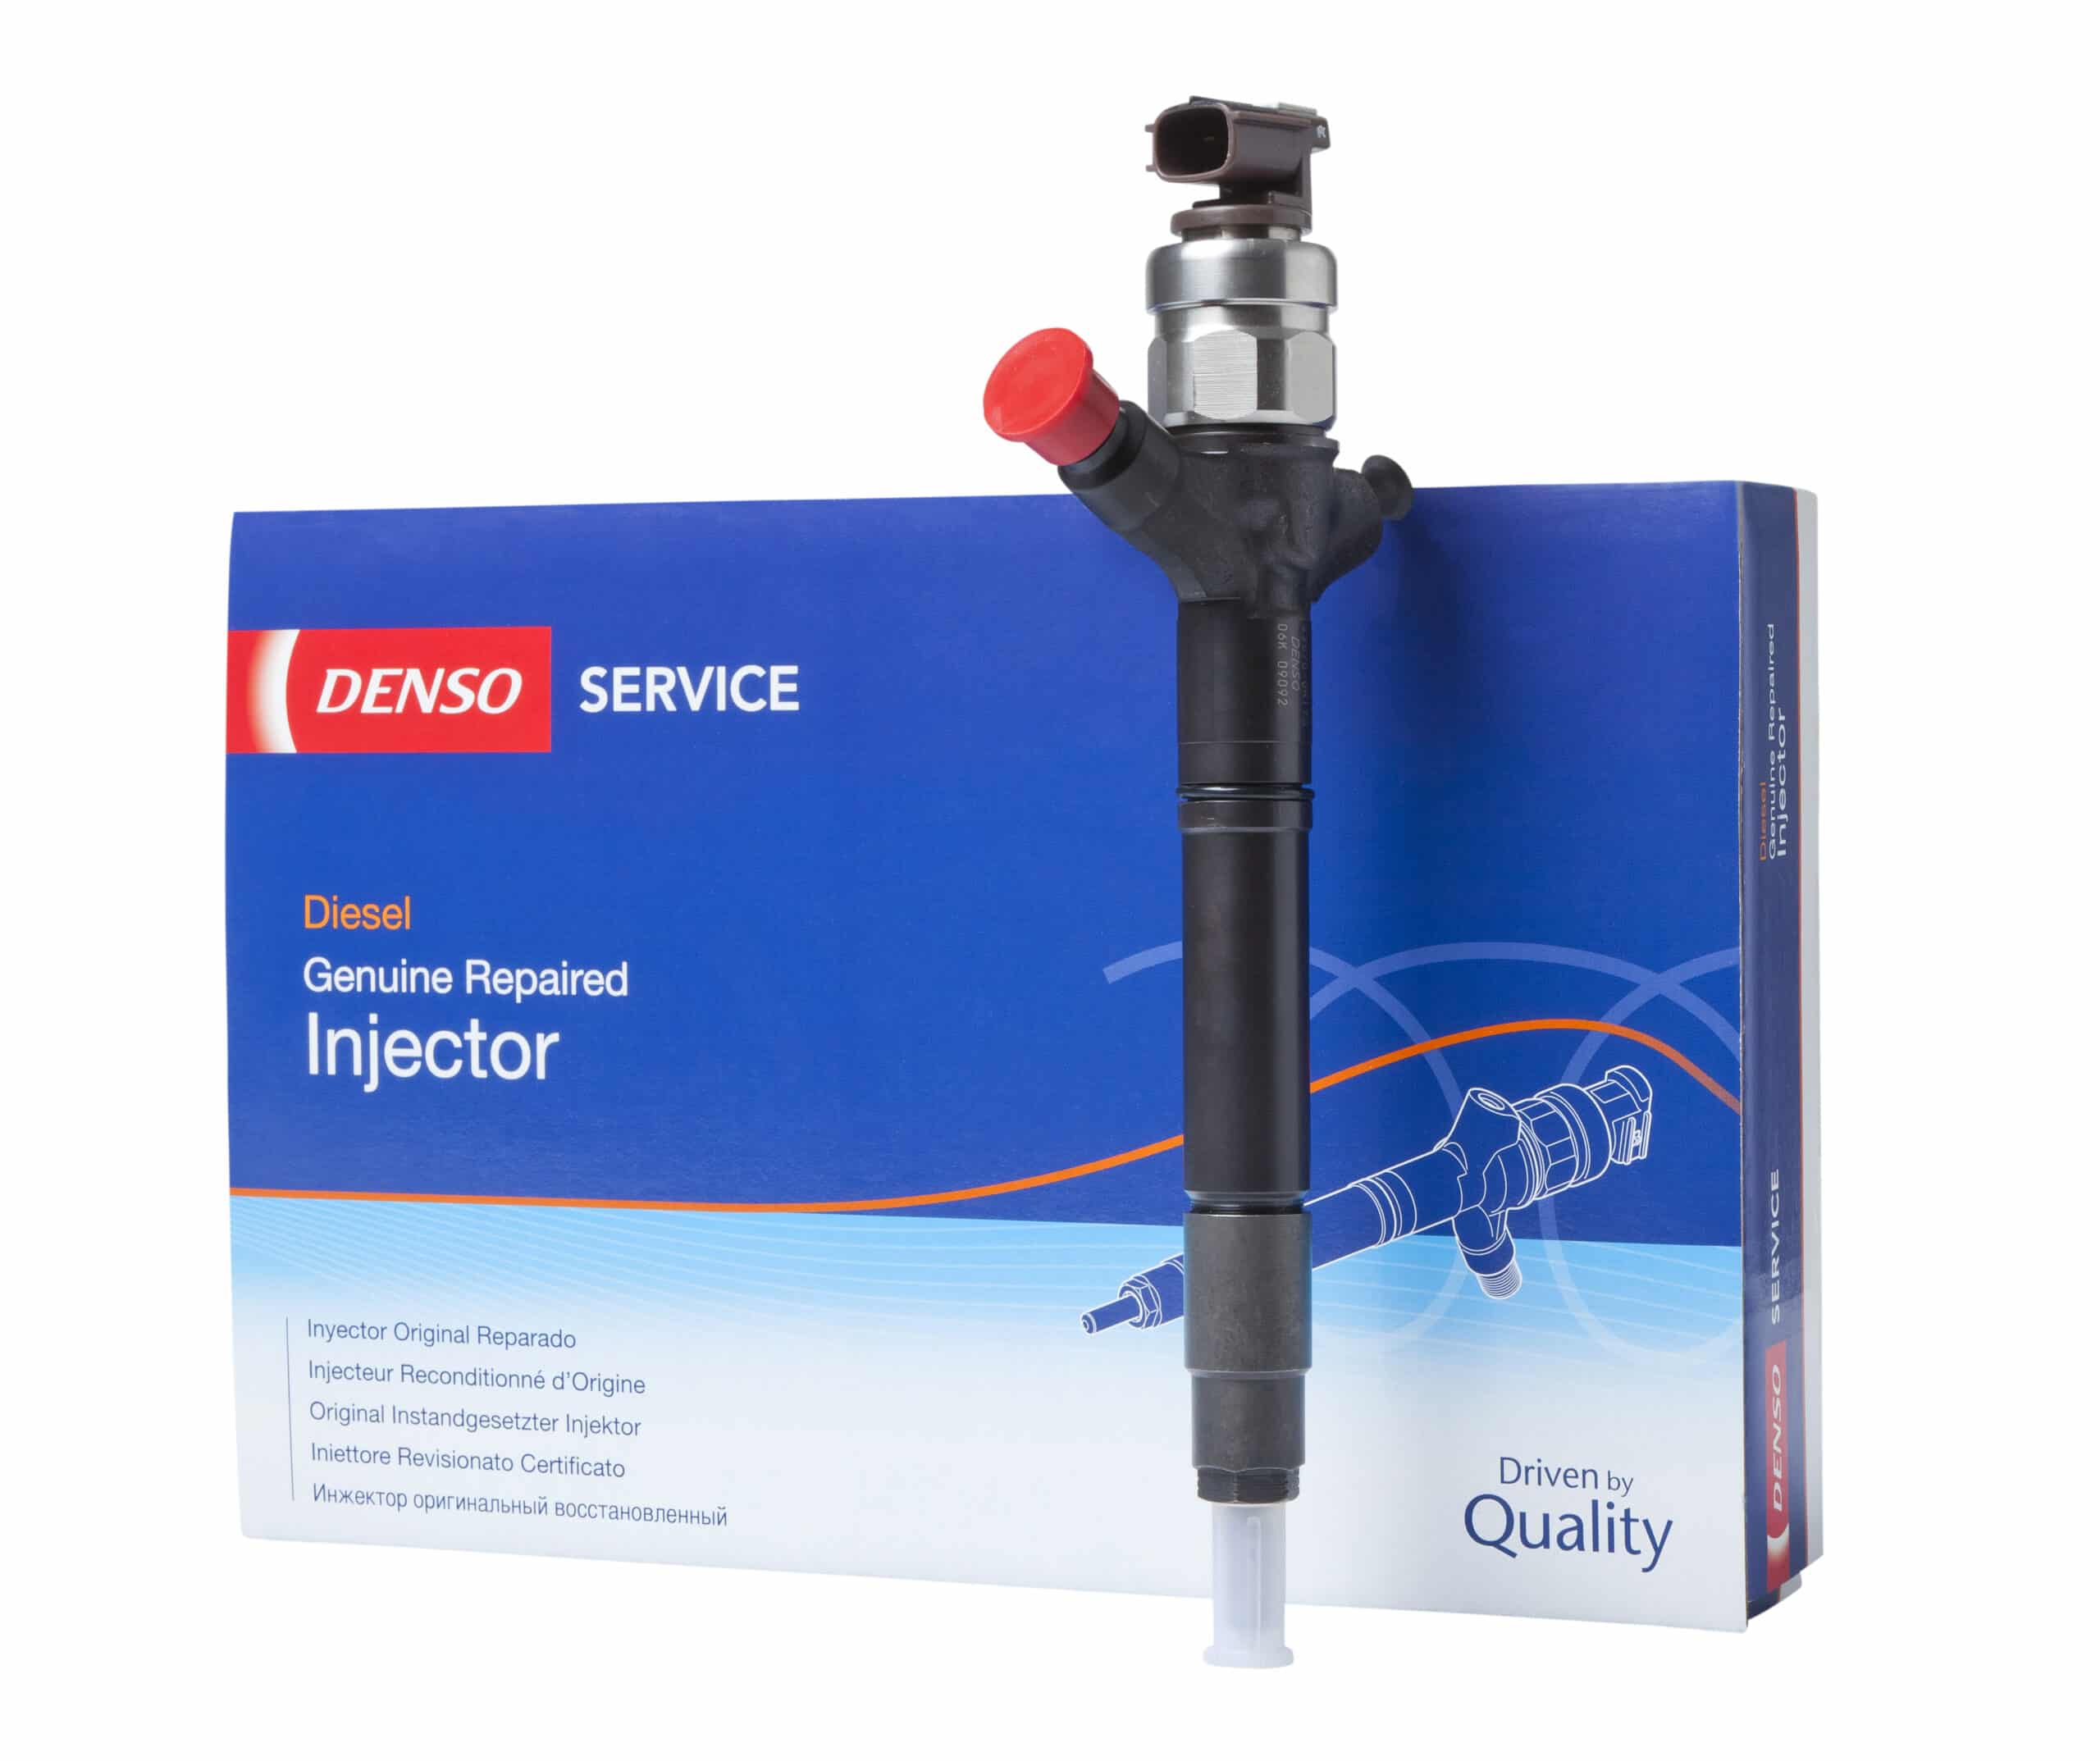 Denso Reconditioned Injector Packaging